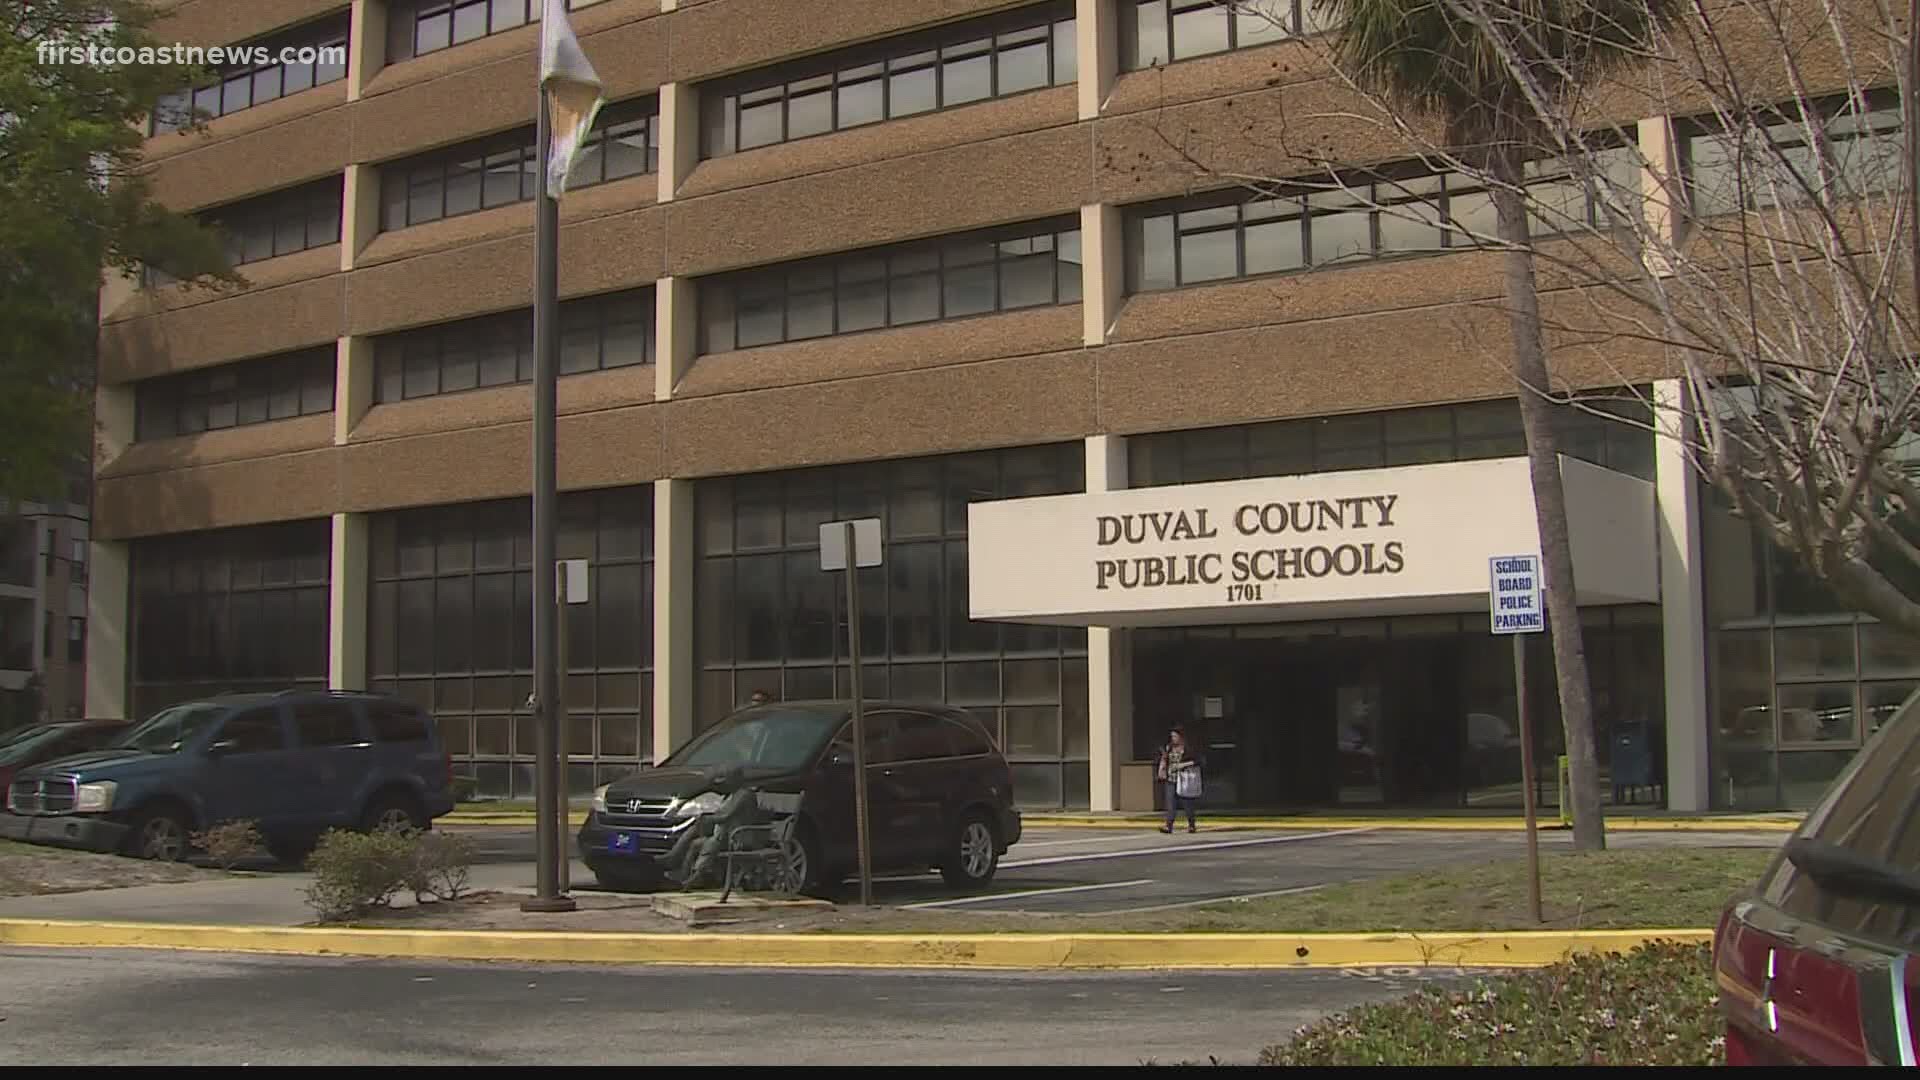 The Florida Department of Health reports 24 cases of COVID-19 reported in Duval County were associated with primary and secondary schools from Aug. 10 through 23.